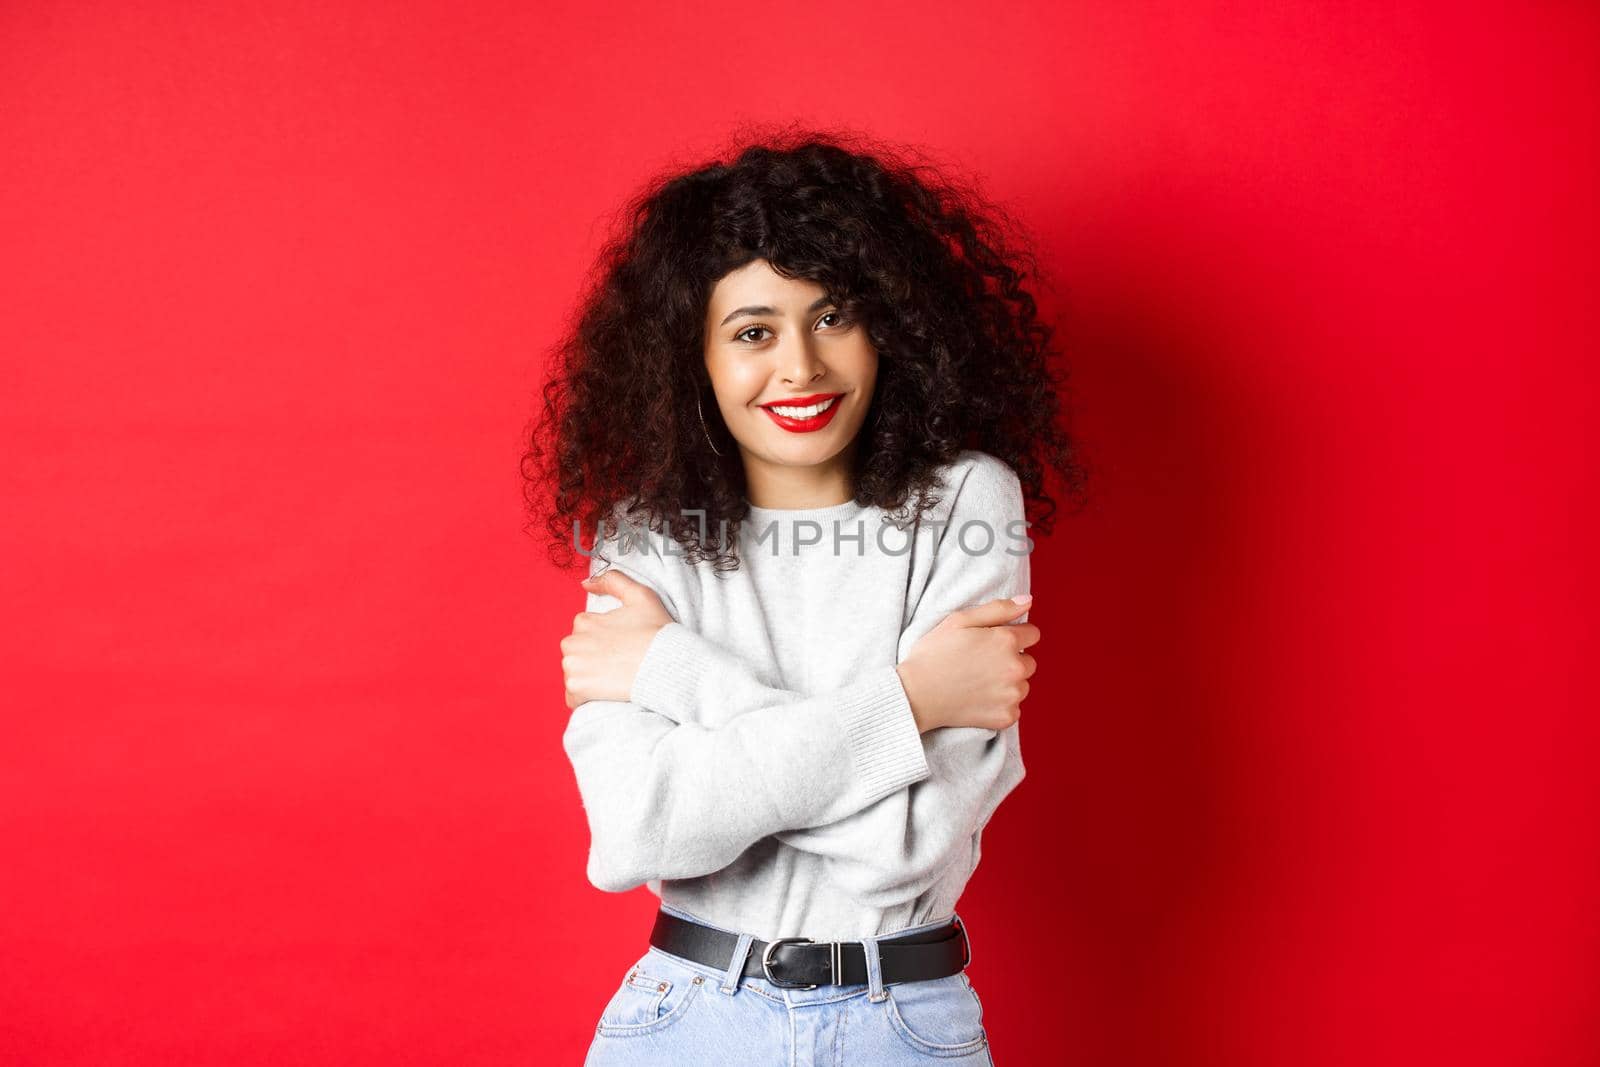 Tender young woman hugging herself, feeling comfortable and happy, smiling silly at camera, standing against red background.